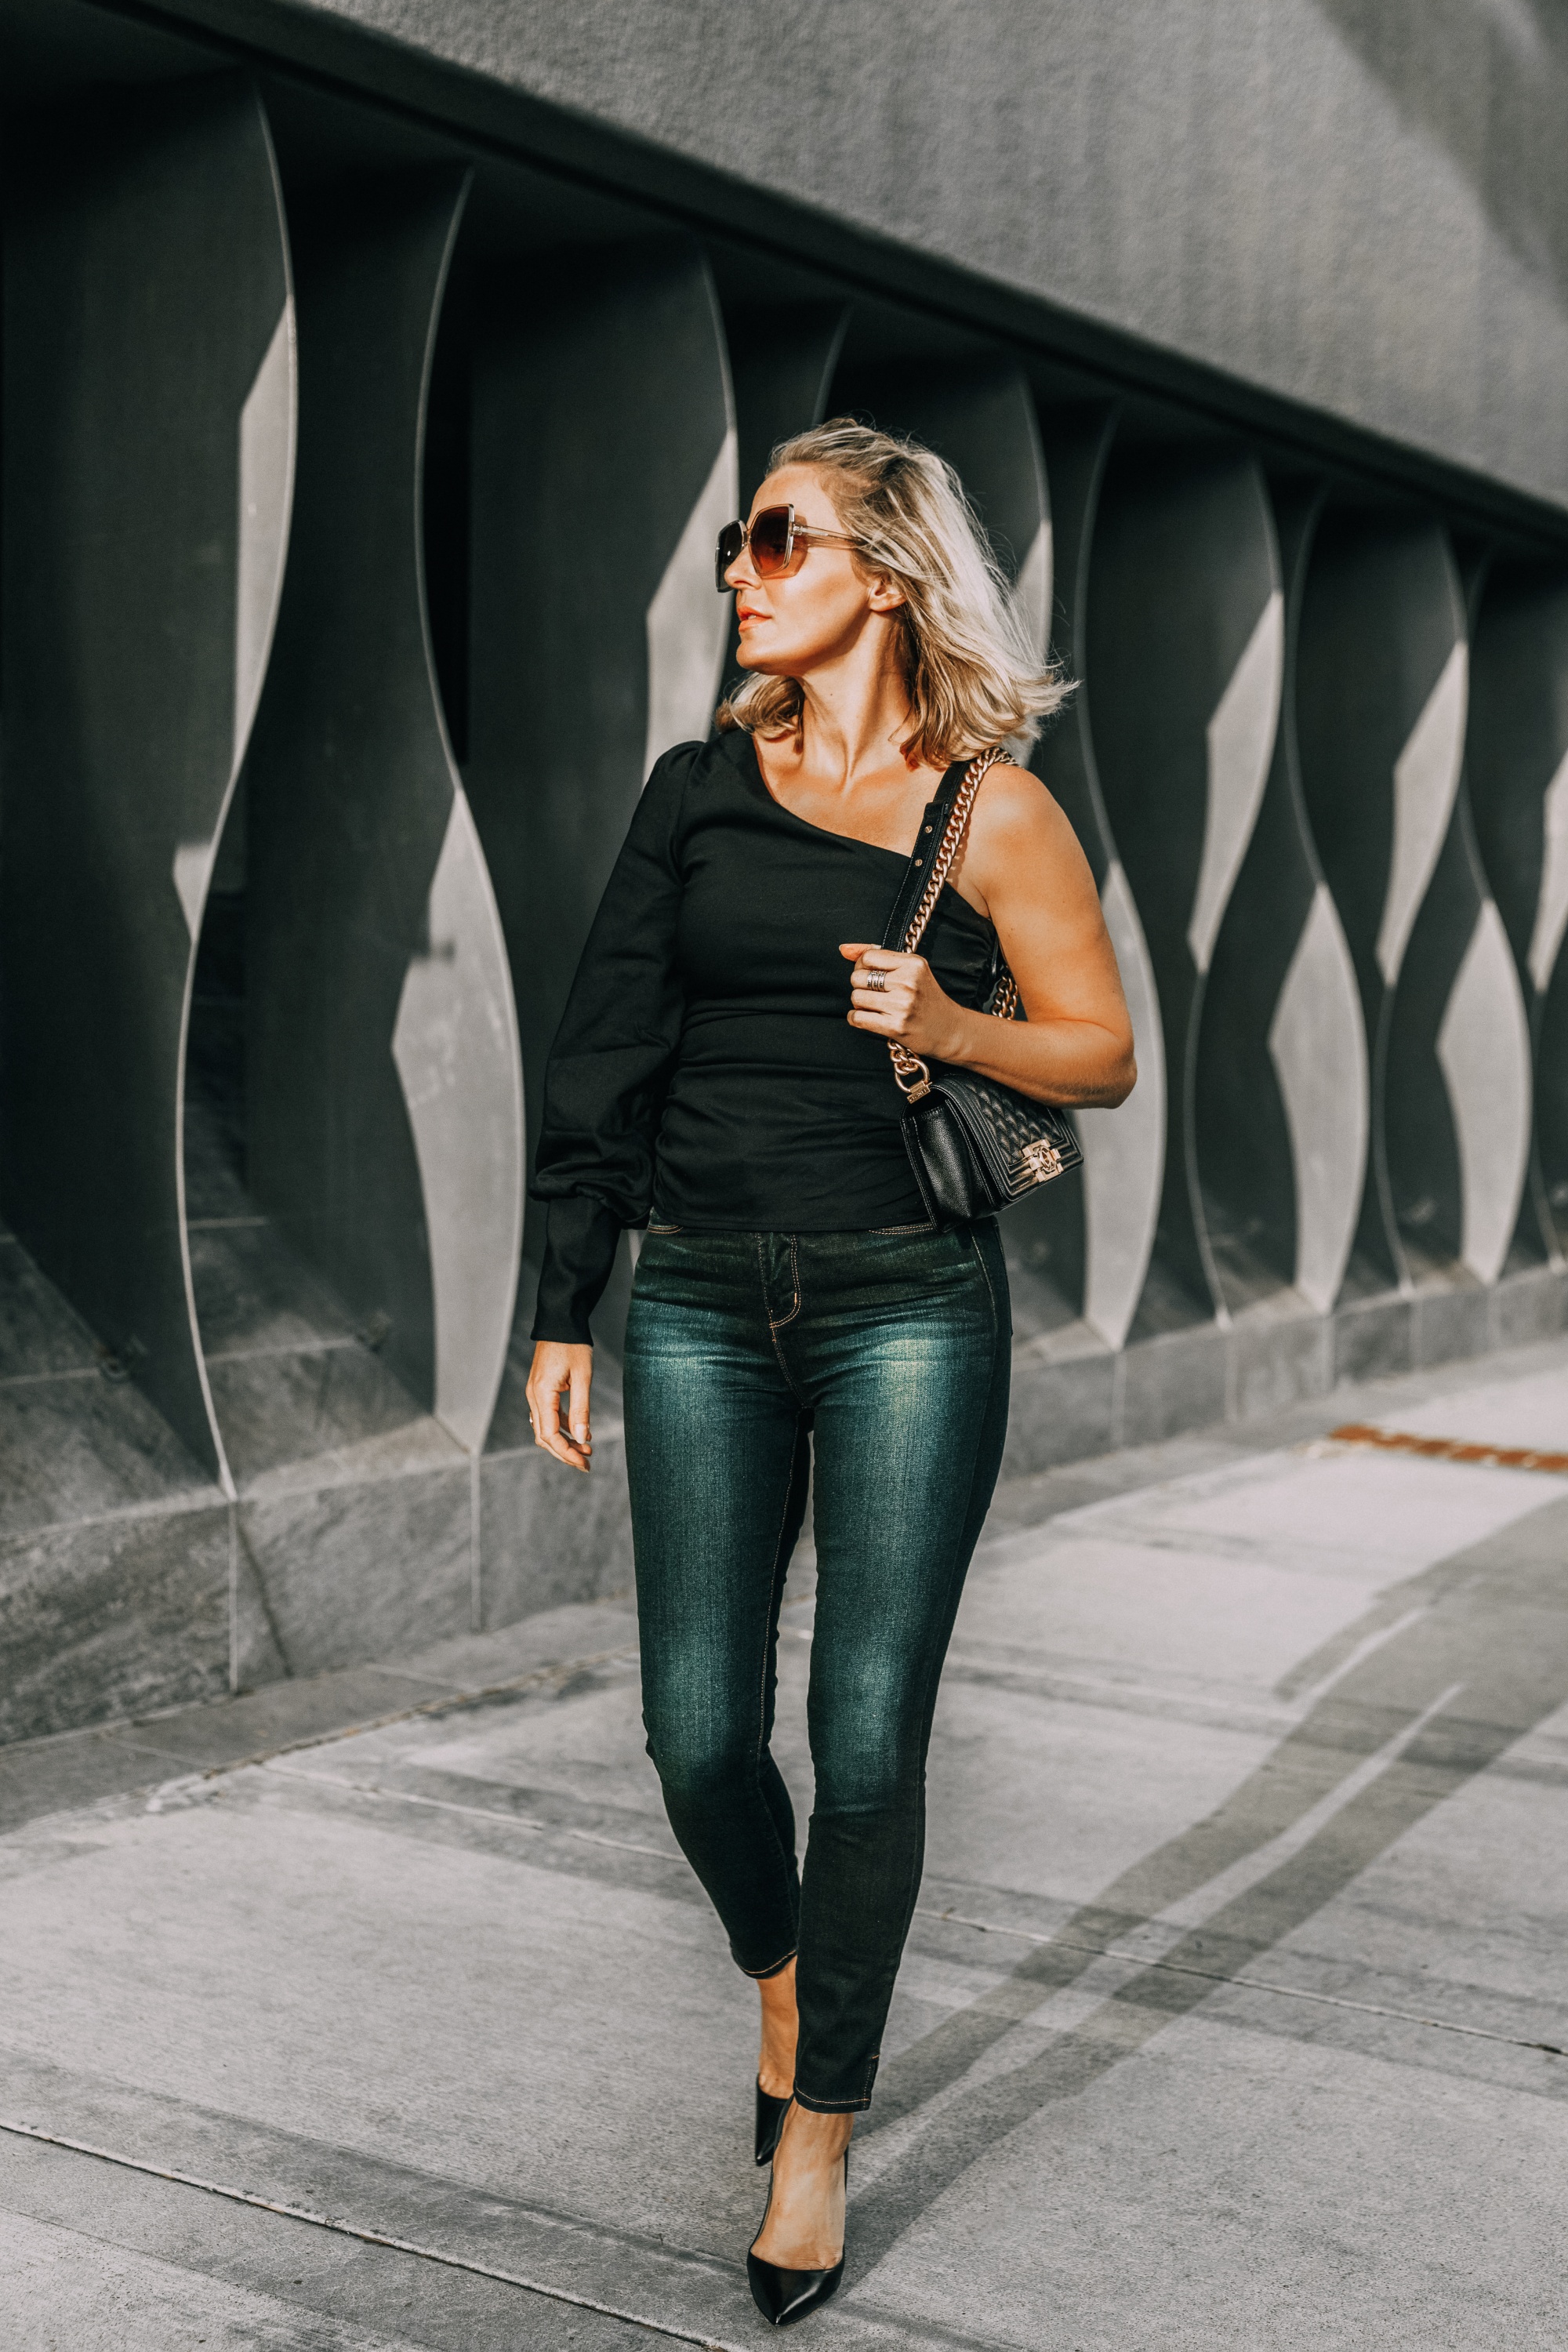 Sexy one-shoulder date night top for women over 40, easy date night outfit styled by fashion blogger over 40 Busbee Style with black shoulder baring l'Academie top, dark wash l'Agence skinny jeans, black Christian Louboutin pumps and quilted Chanel boy bag